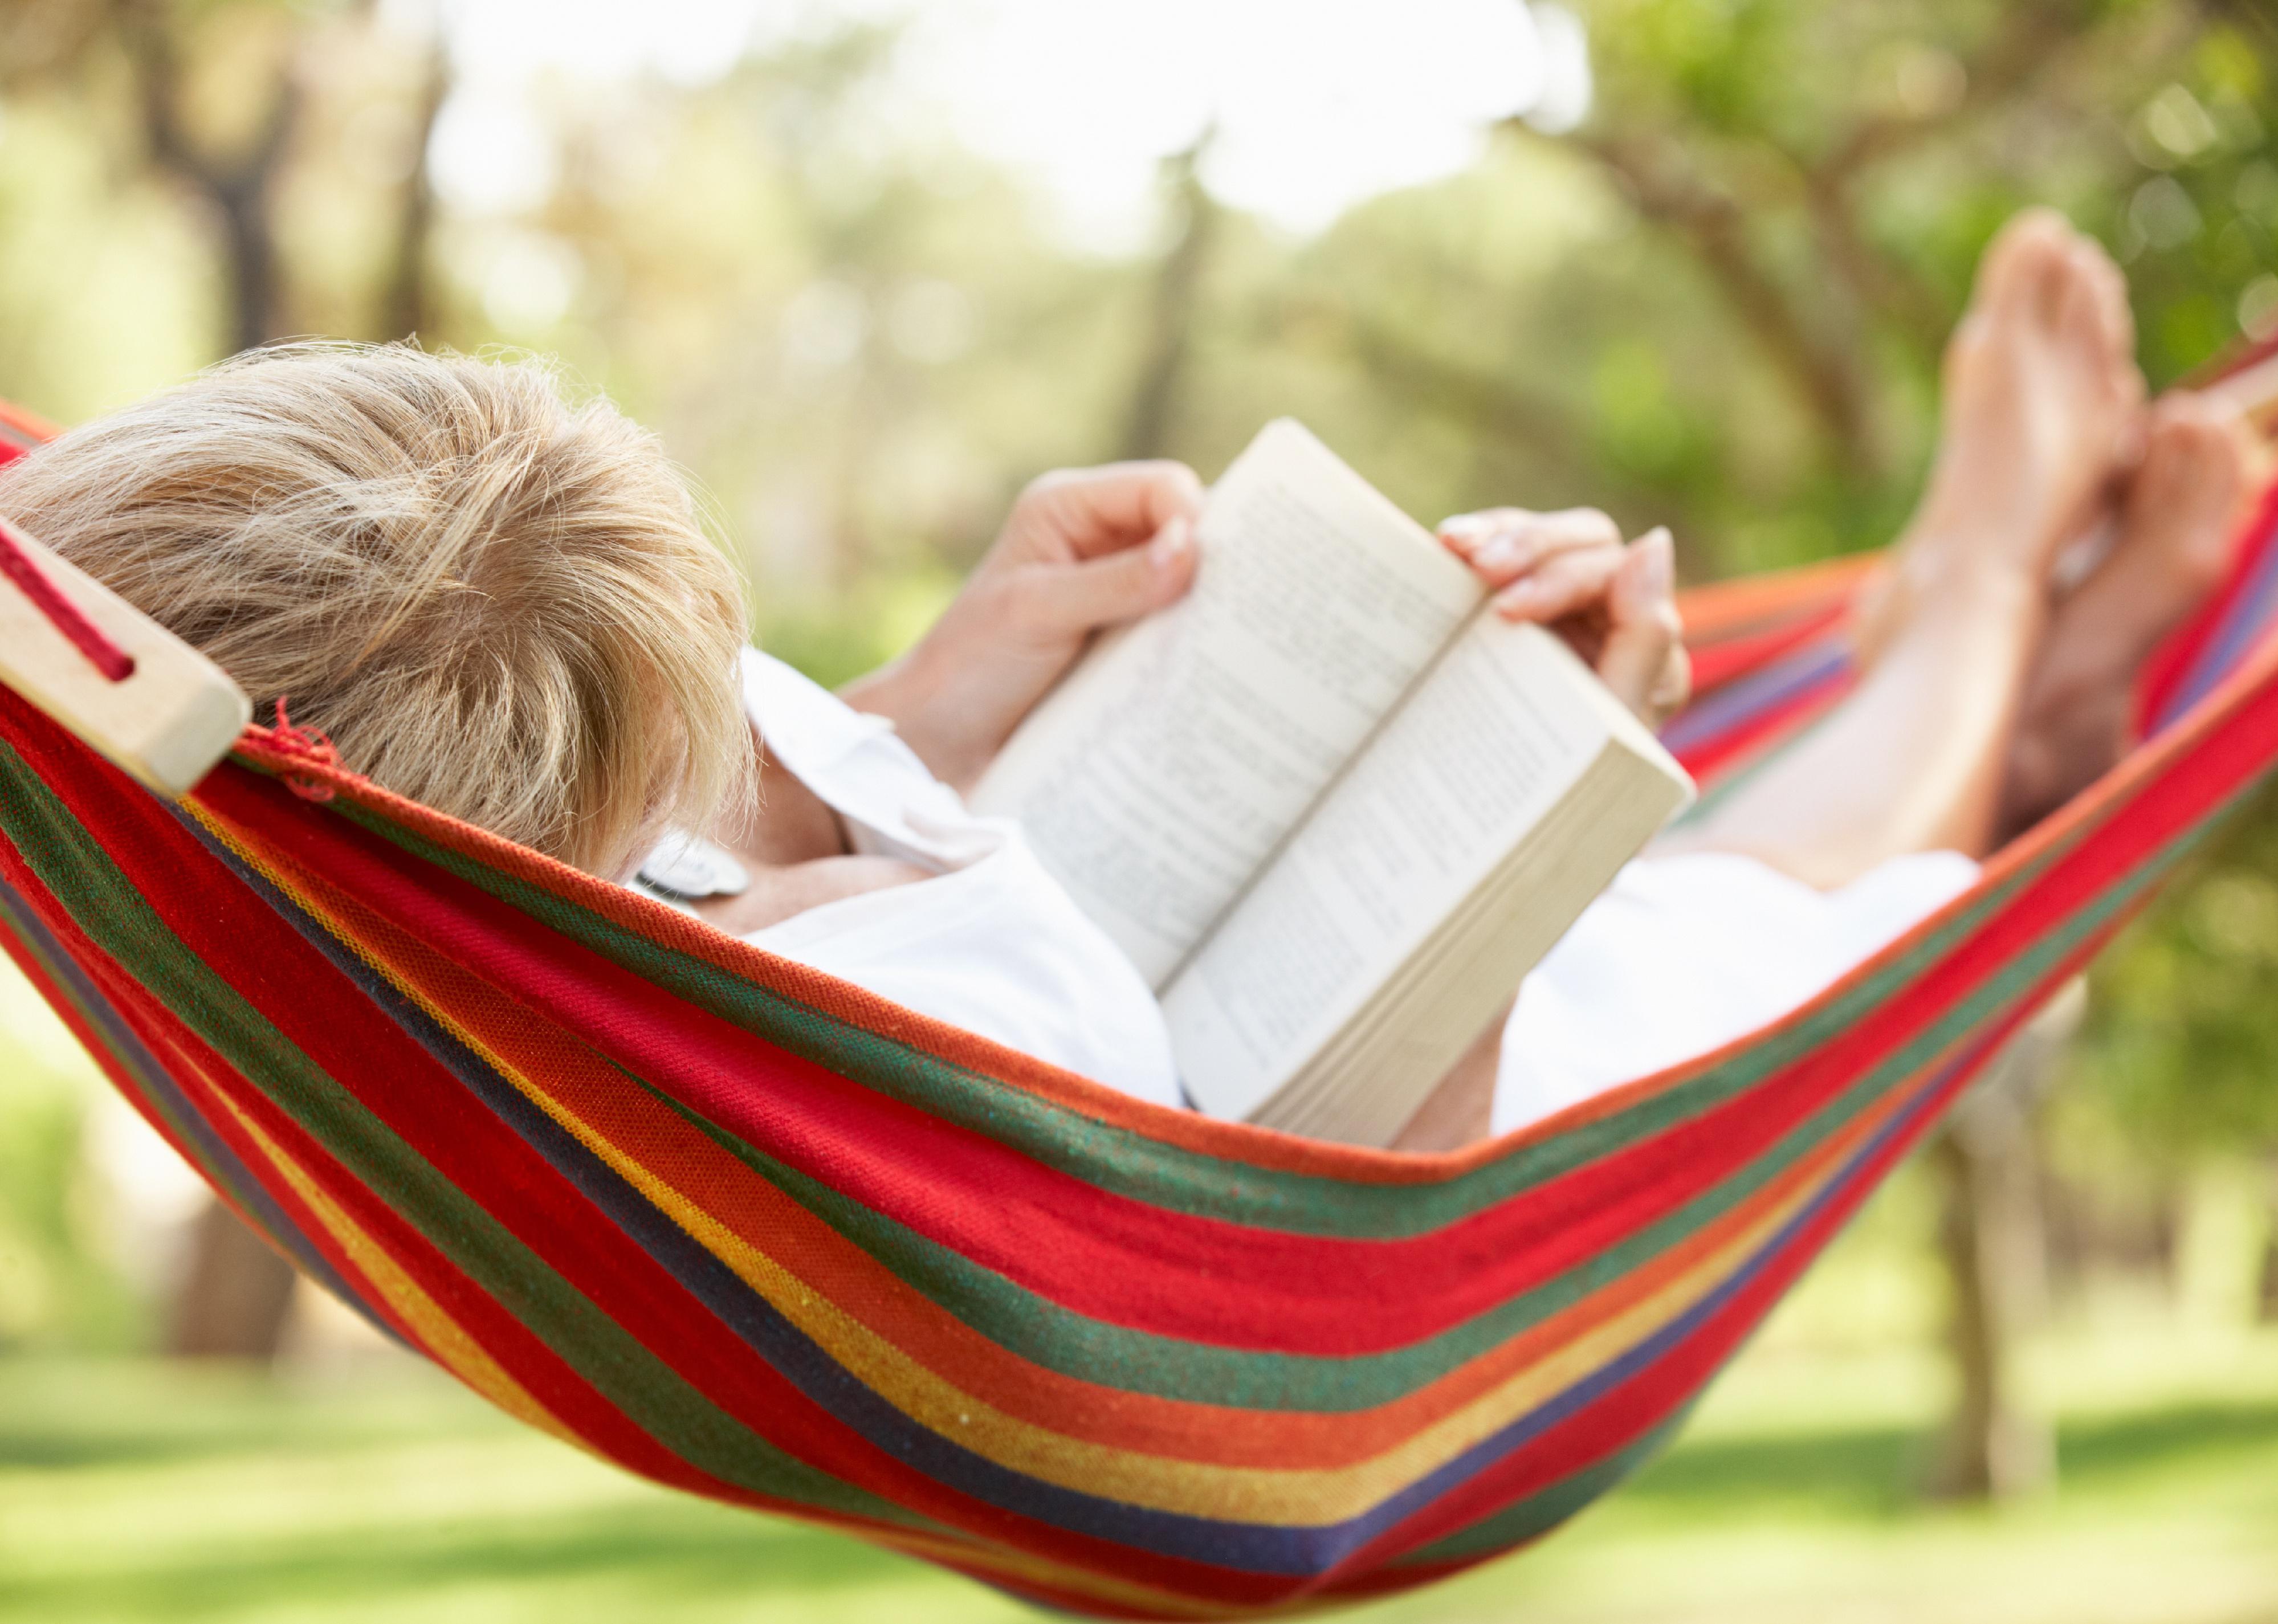 Senior woman relaxing in hammock with book.